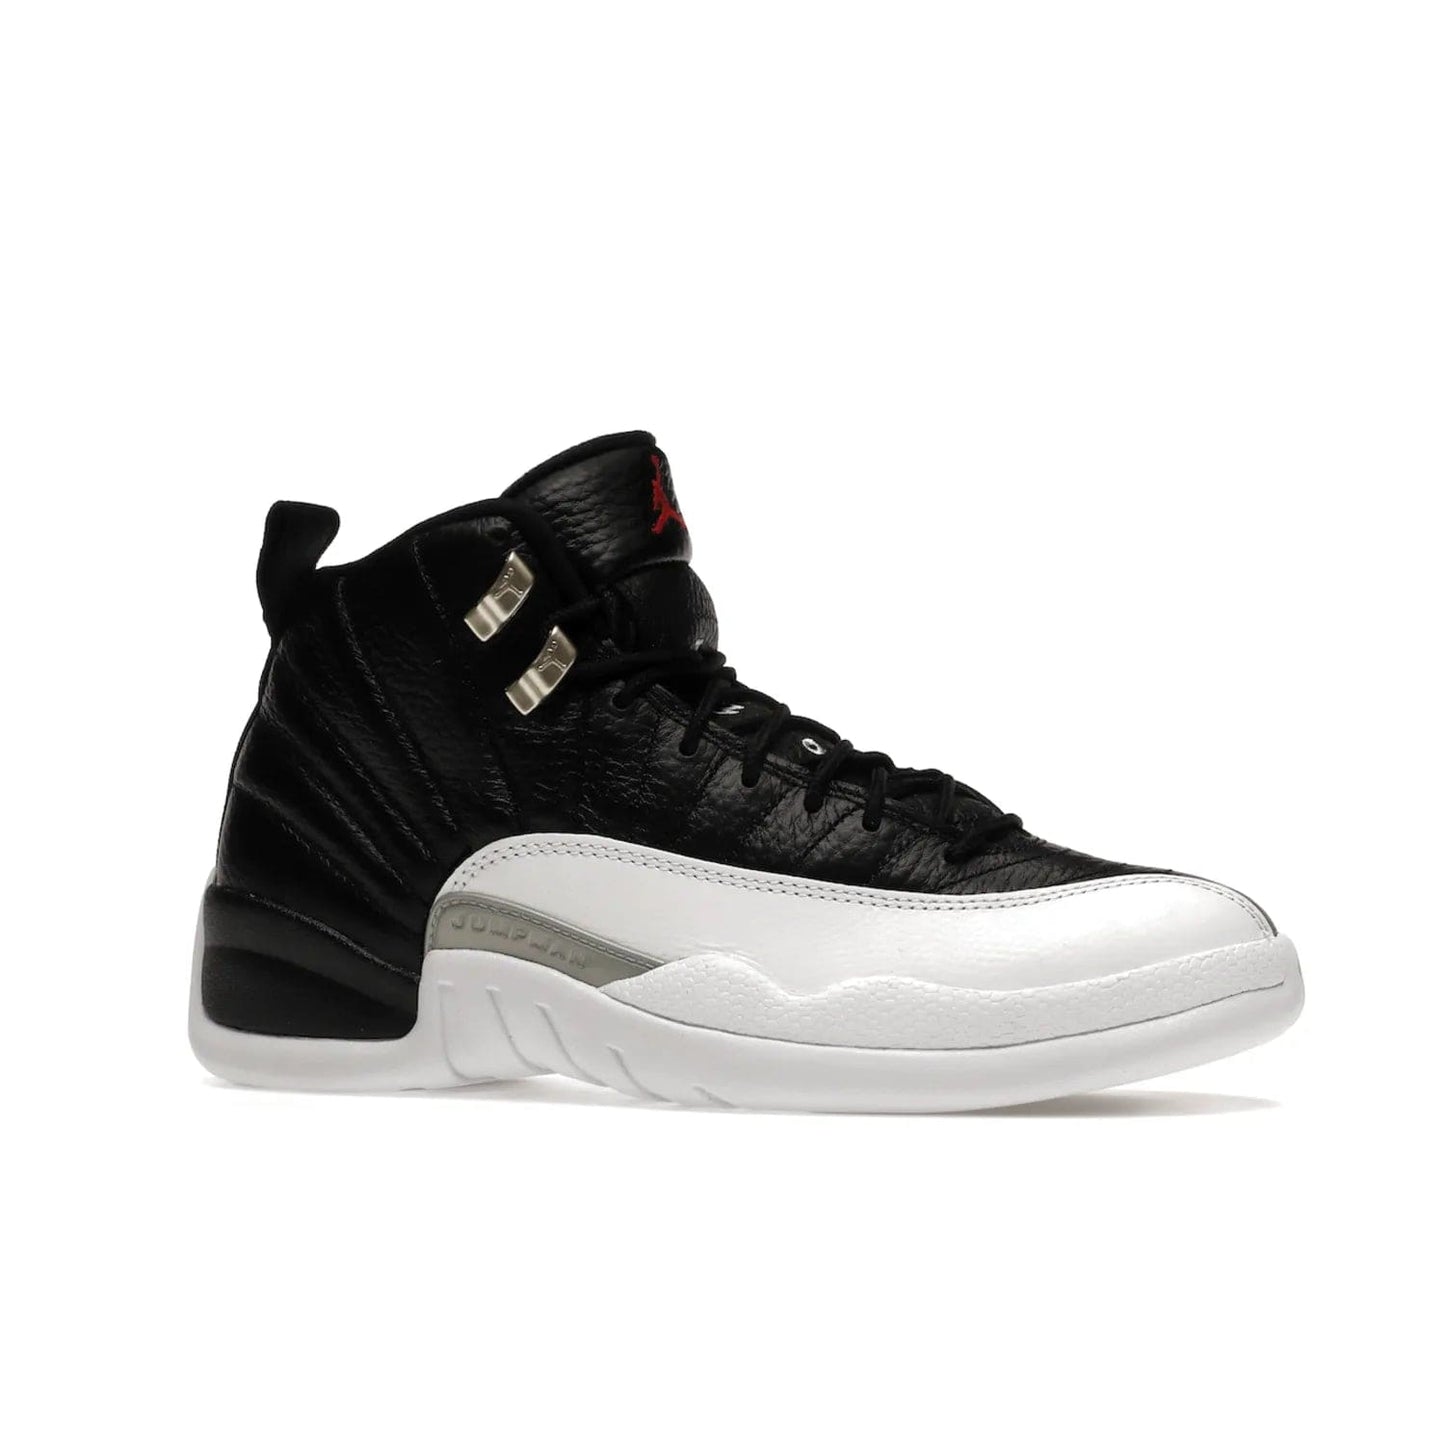 Jordan 12 Retro Playoffs (2022) - Image 3 - Only at www.BallersClubKickz.com - Retro Air Jordan 12 Playoffs. Celebrate 25 years with MJ's iconic shoe. Black tumbled leather upper, white sole with carbon fiber detailing and Jumpman embroidery. Must-have for any Jordan shoe fan. Releases March 2022.